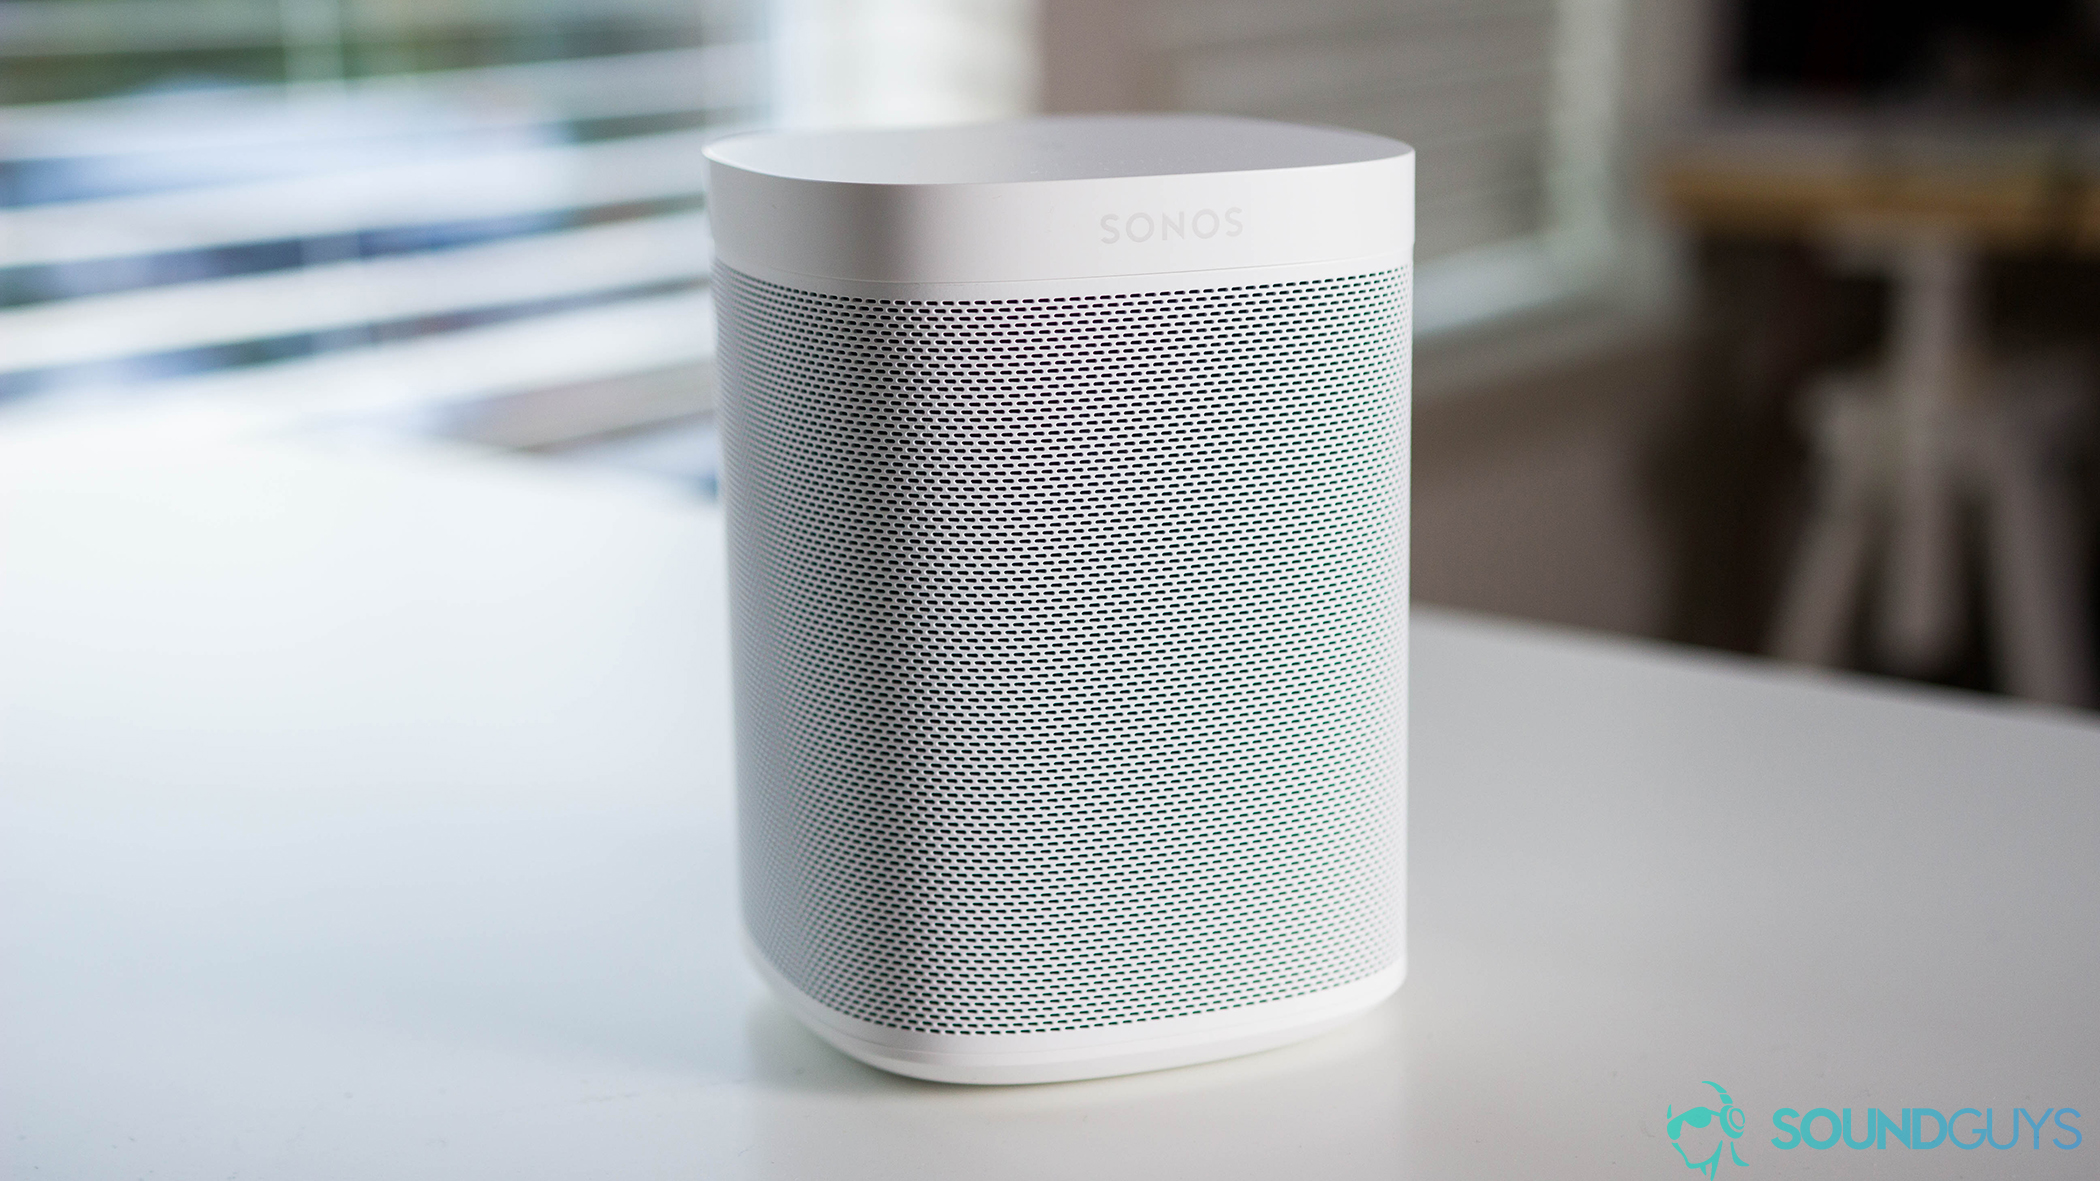 Picture of the Sonos One in white on a white surface with windows blinds in the background.